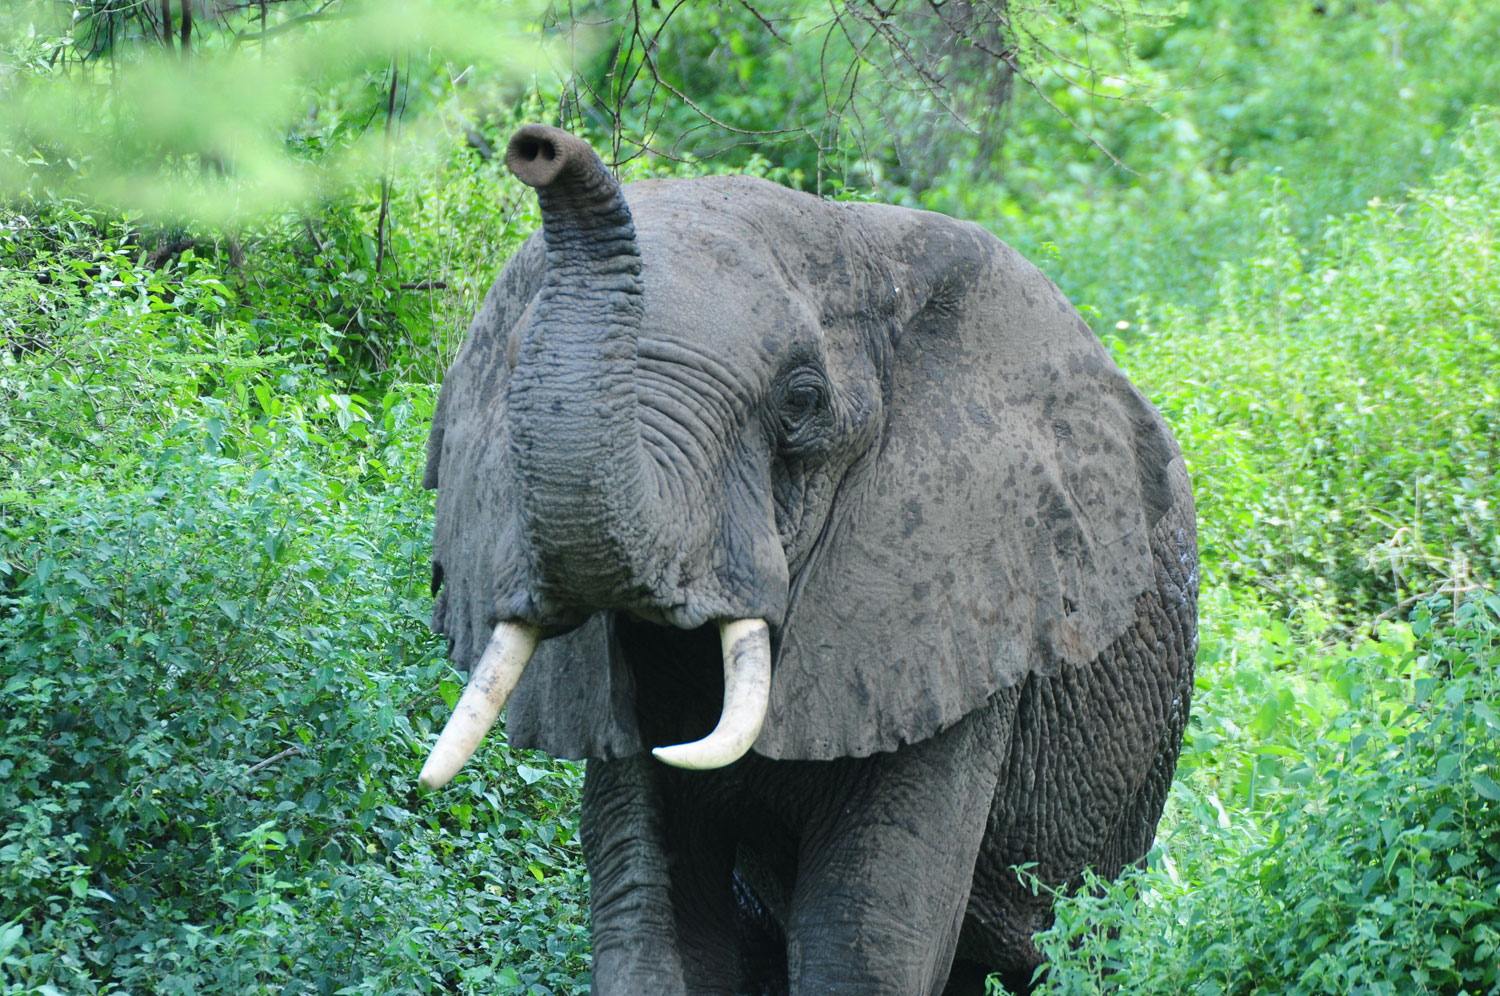 Tembo is the Kiswahili word for Elephant. The Ngorongoro elephants are attracted to Gibb’s Farm and can be frequently heard trumpeting nearby.